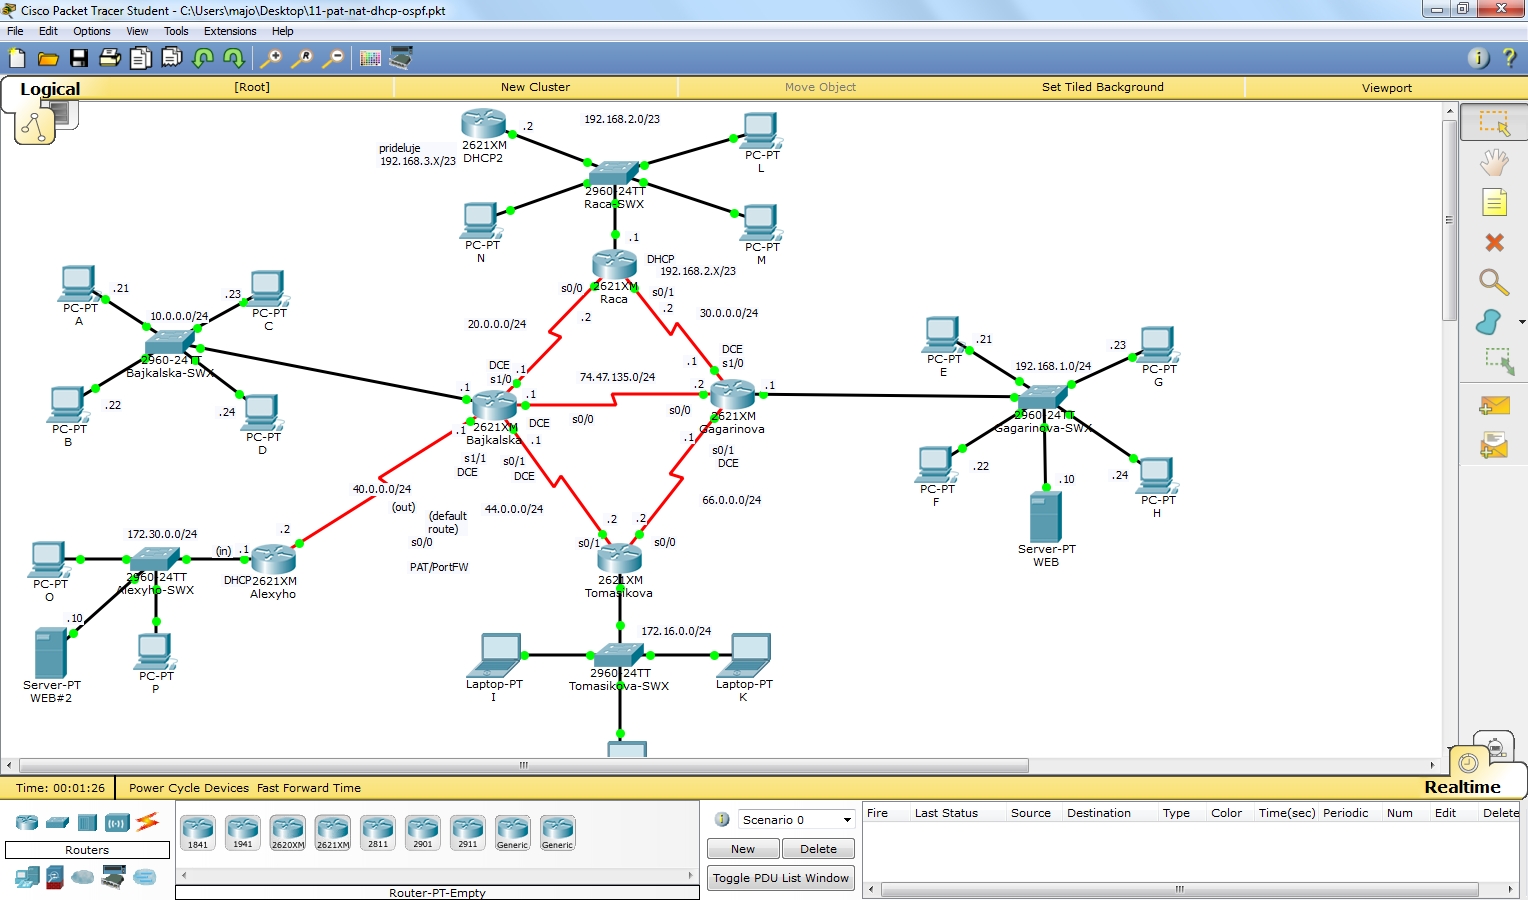 Cisco packet tracer